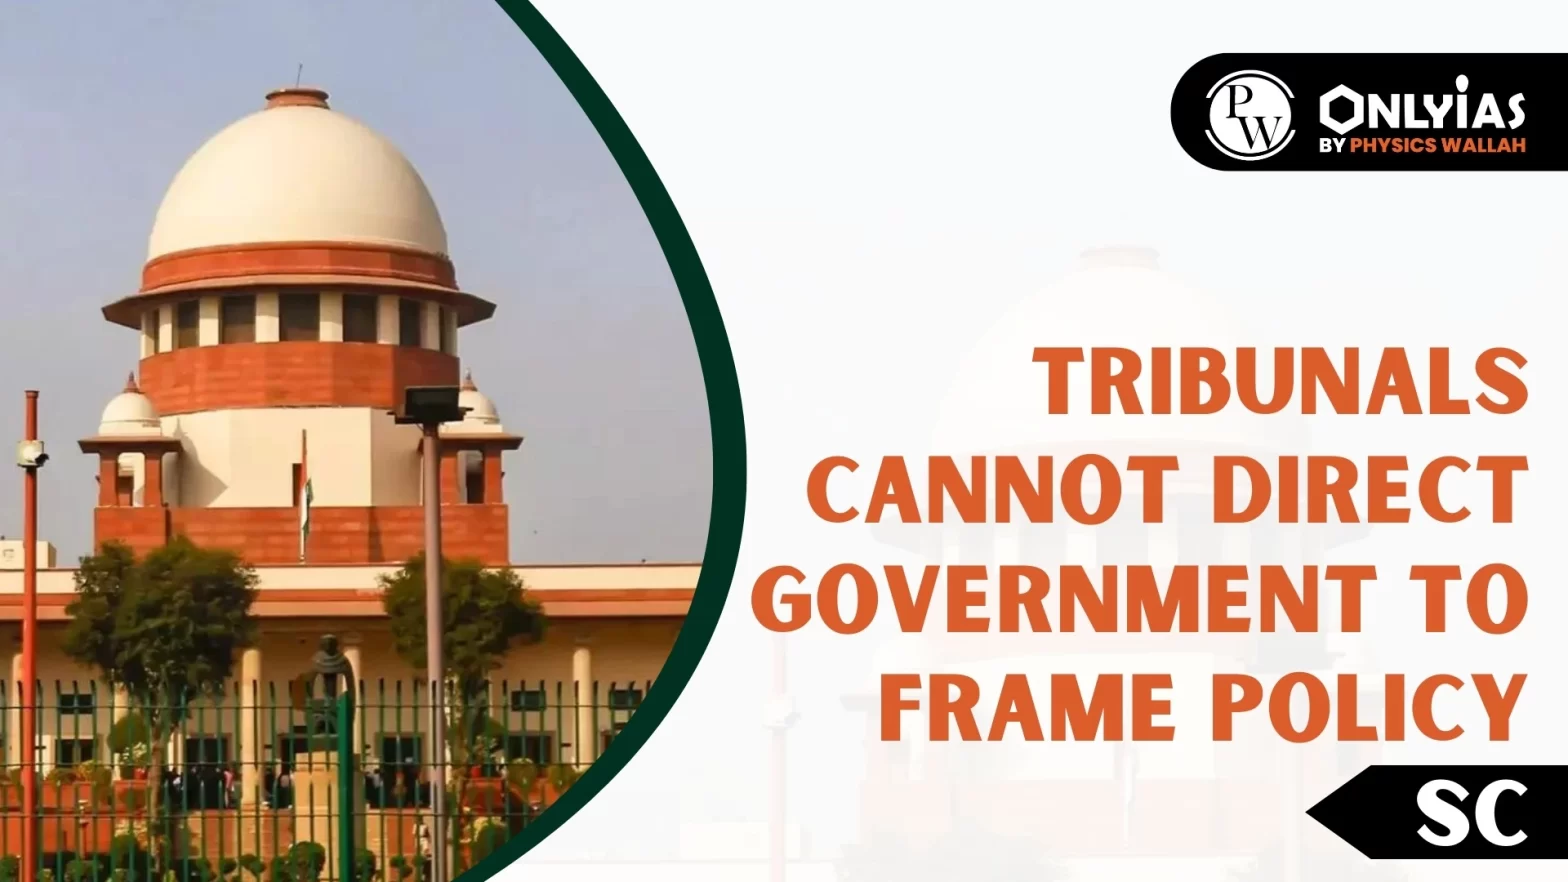 Tribunals Cannot Direct Government to Frame Policy: SC